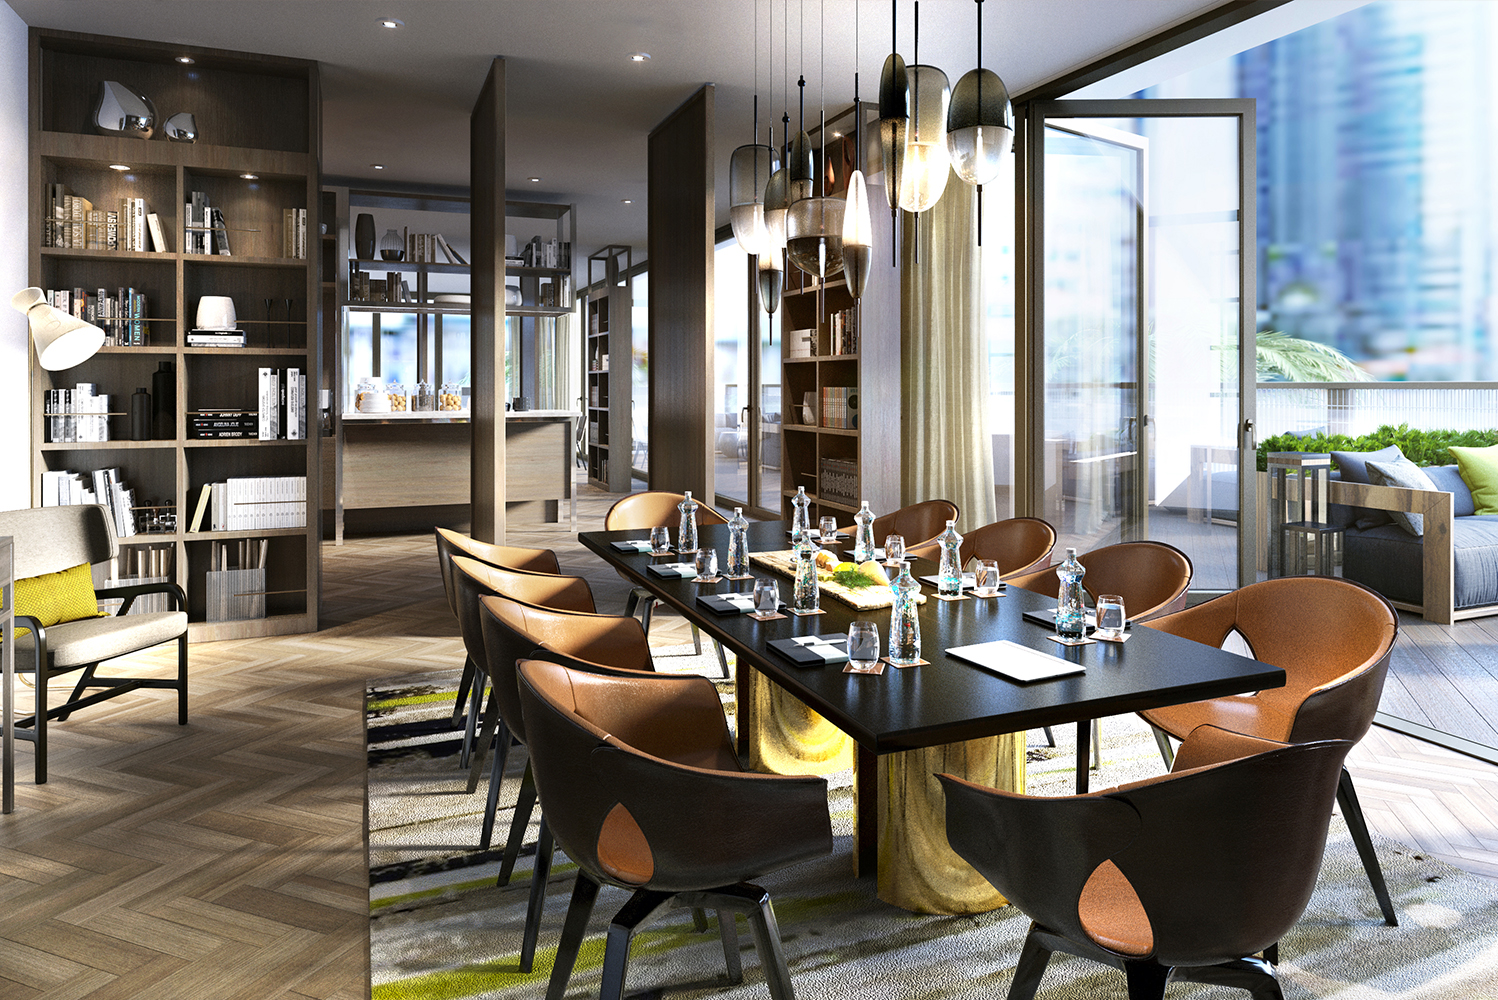 InterContinental Perth City Centre is scheduled to open on October 15 